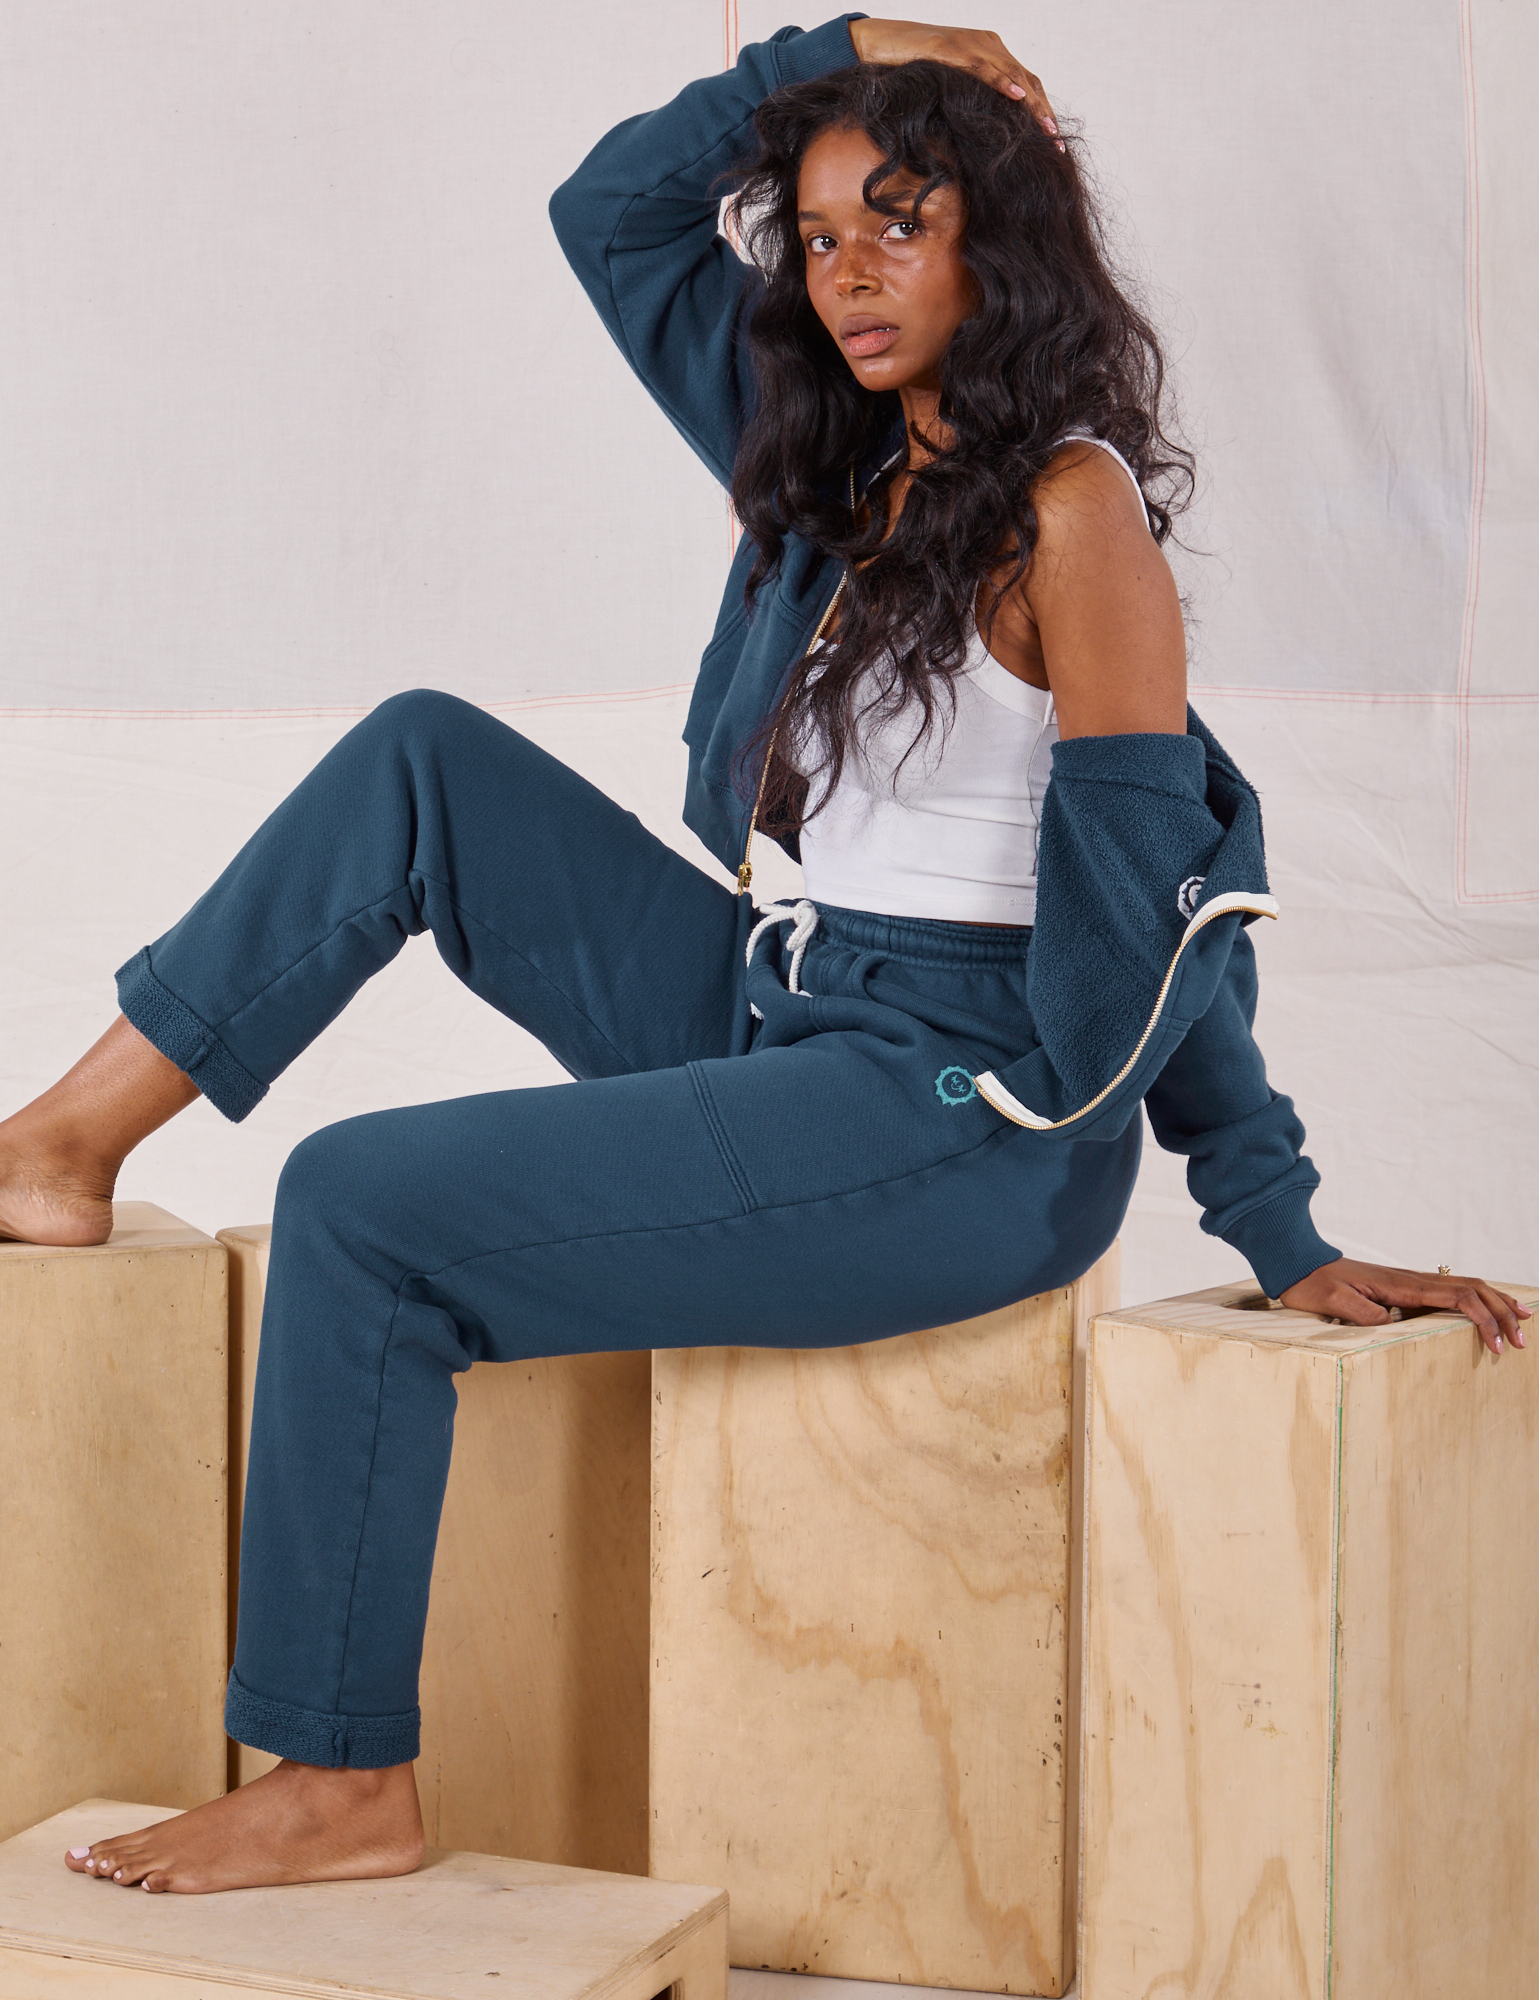 Kandia is wearing Cropped Zip Hoodie in Lagoon, vintage off-white Cropped Tank and matching Rolled Cuff Sweat Pants